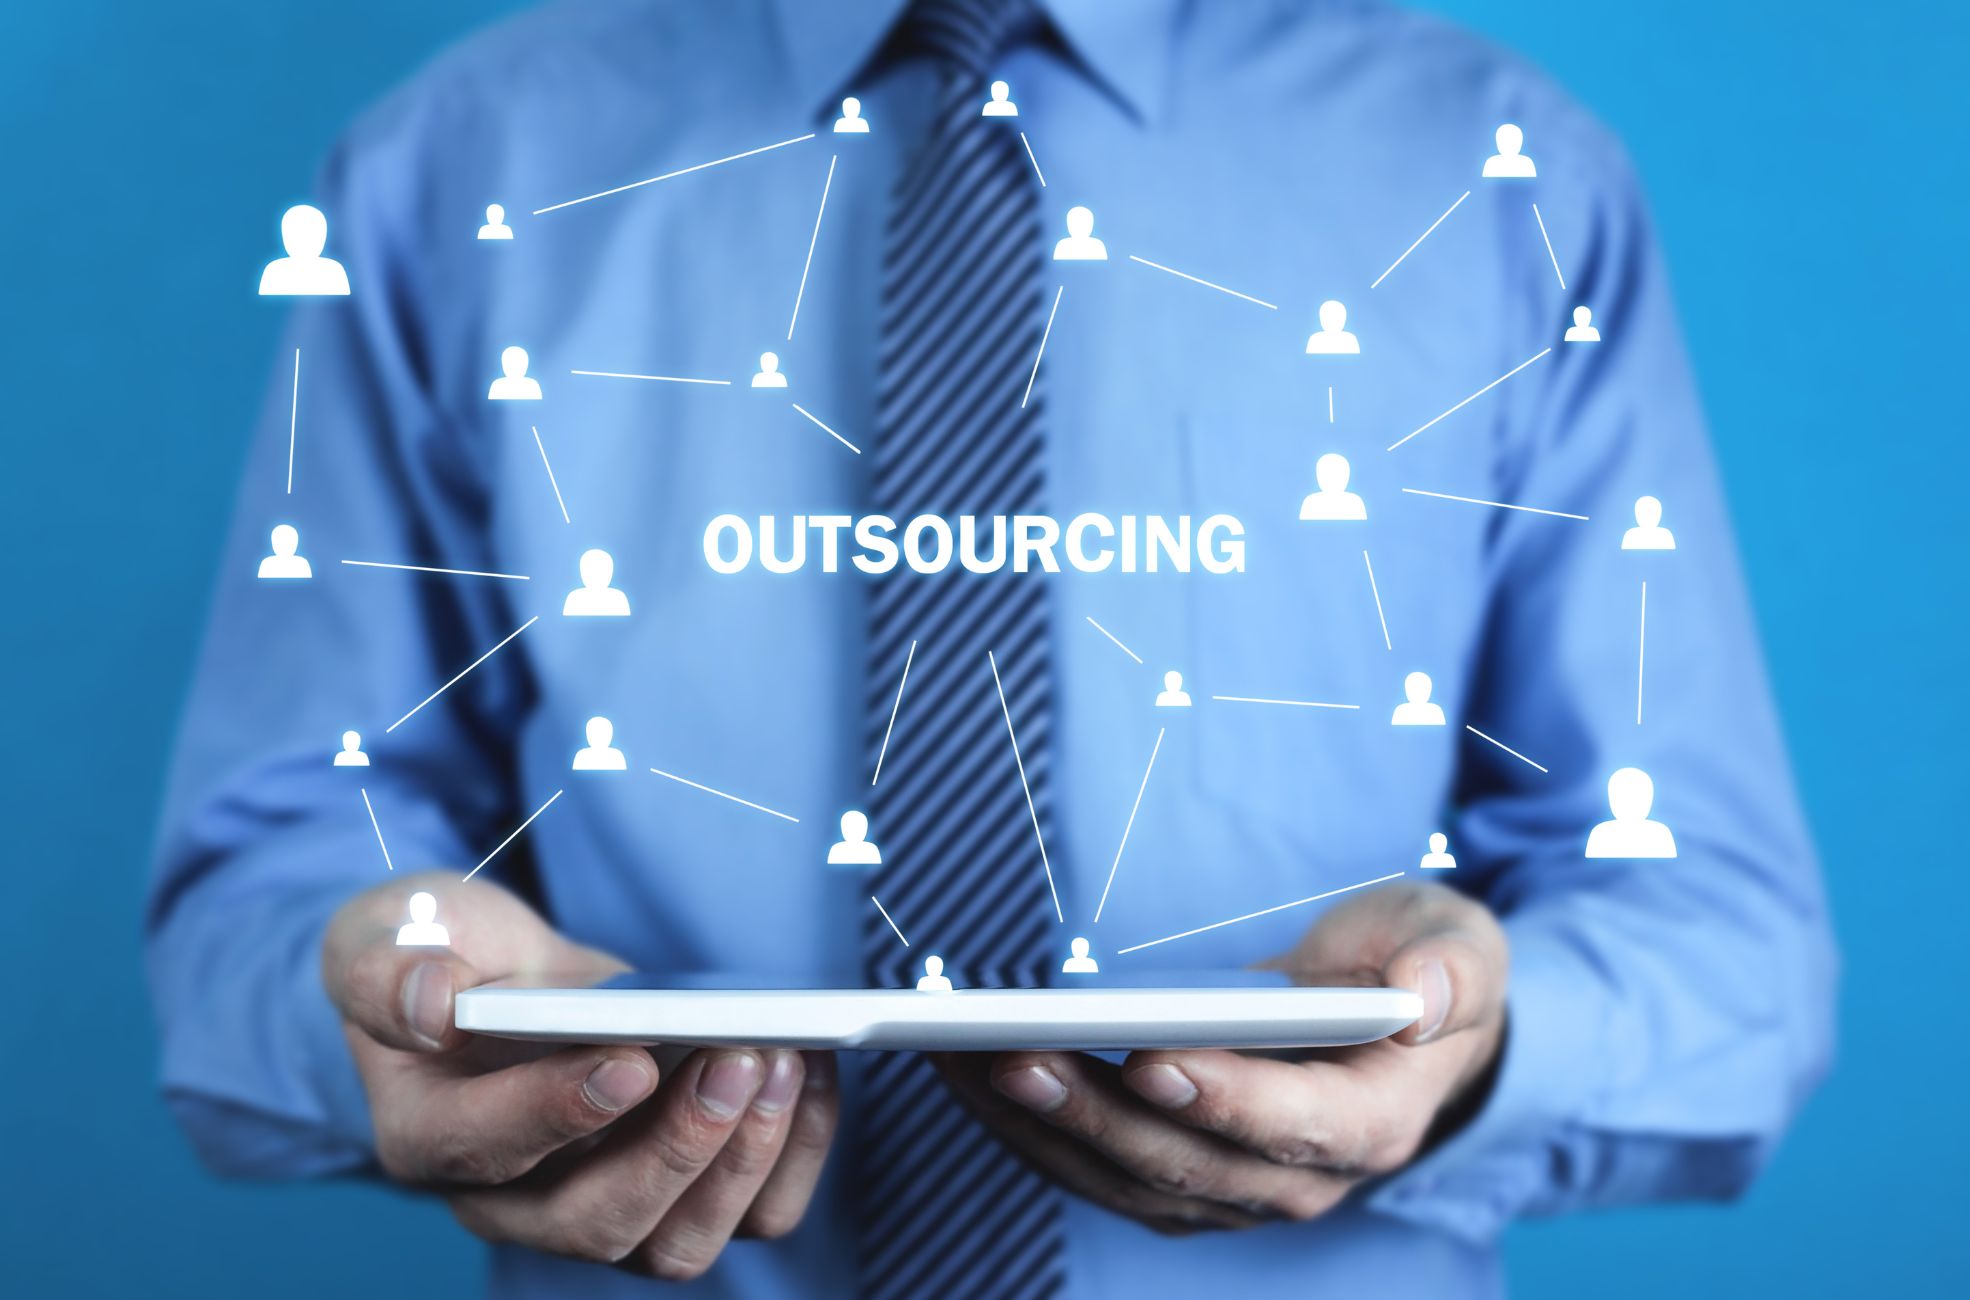 Business Man Pointing To Word "Outsourcing"